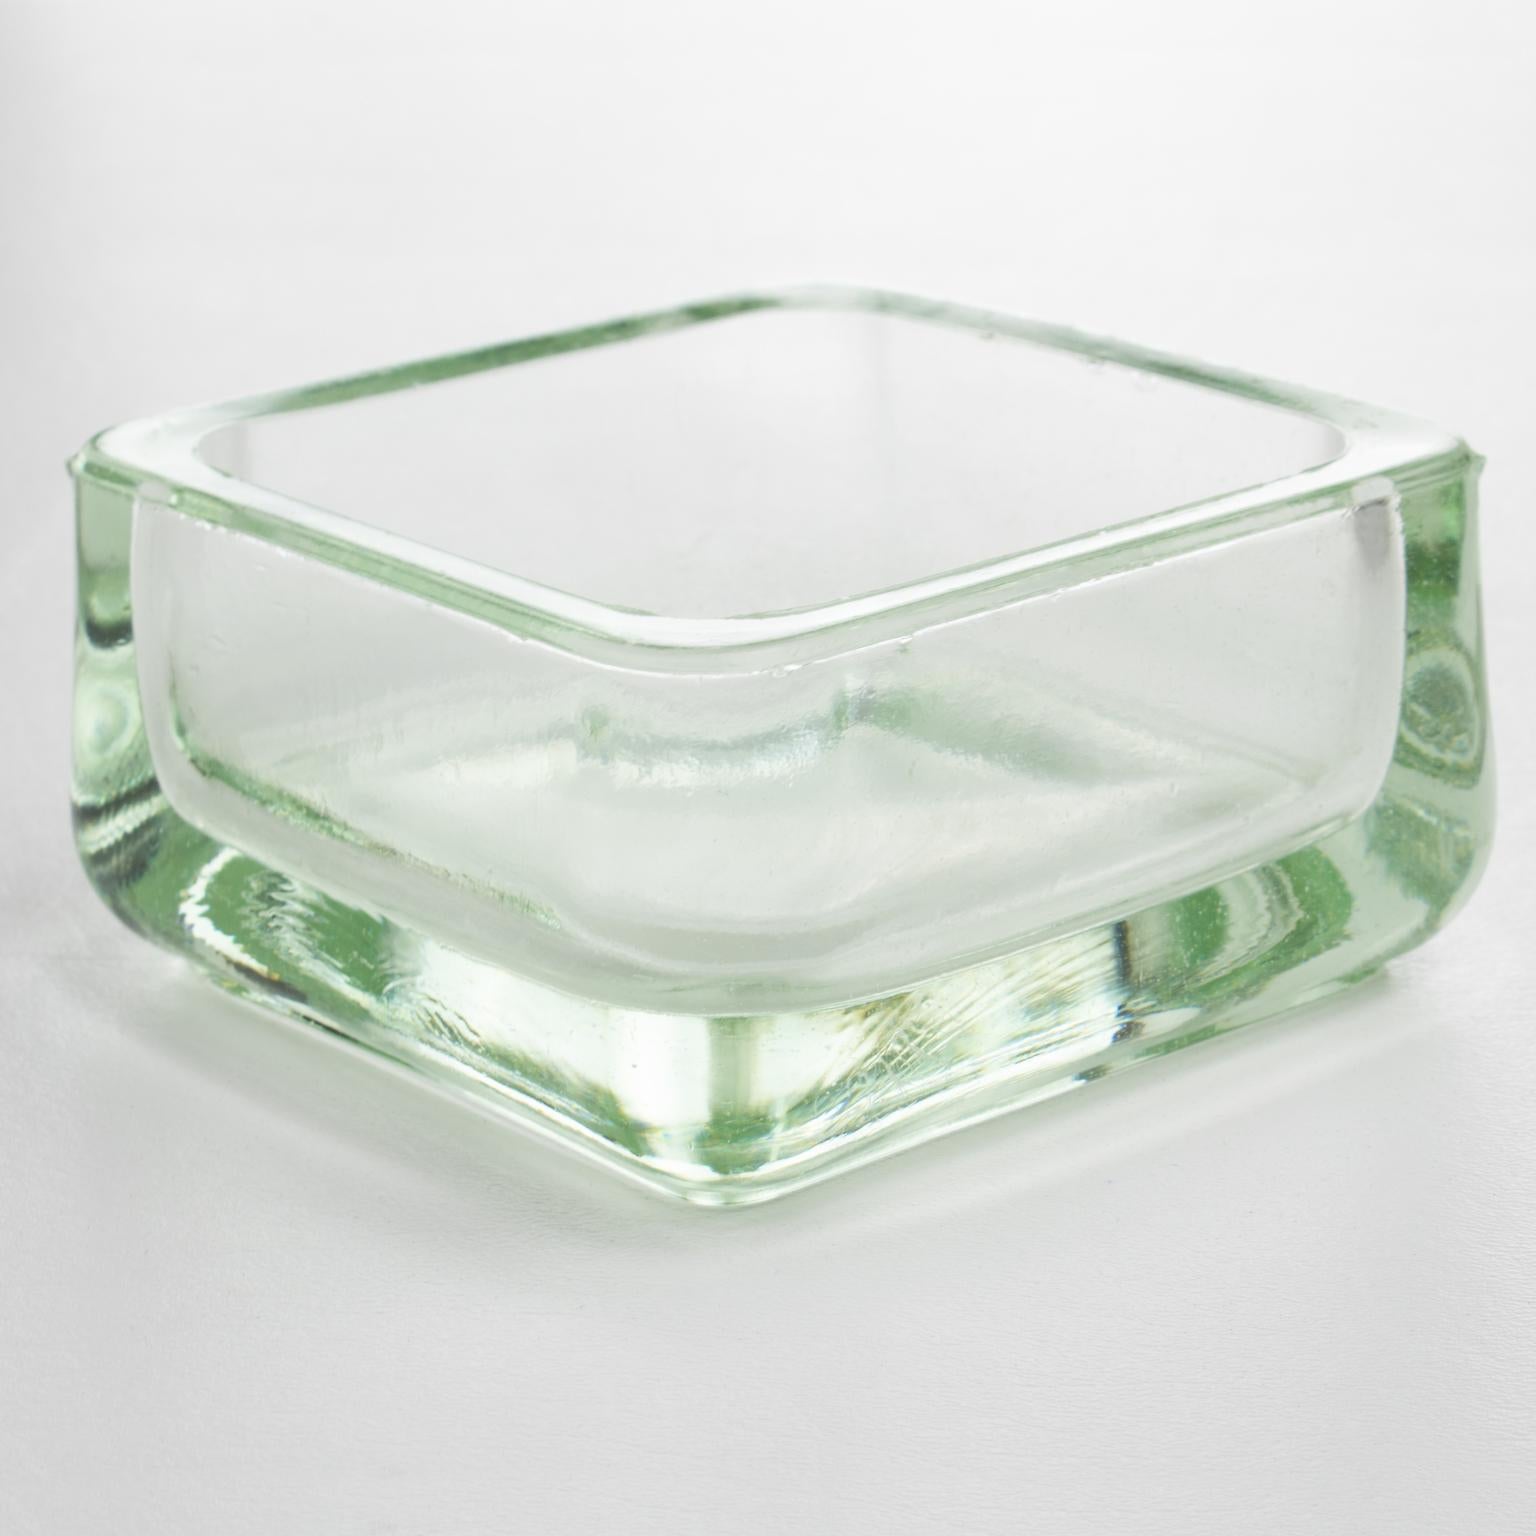 Mid-20th Century Designed by Le Corbusier for Lumax Molded Glass Desk Accessory Ashtray Catchall For Sale